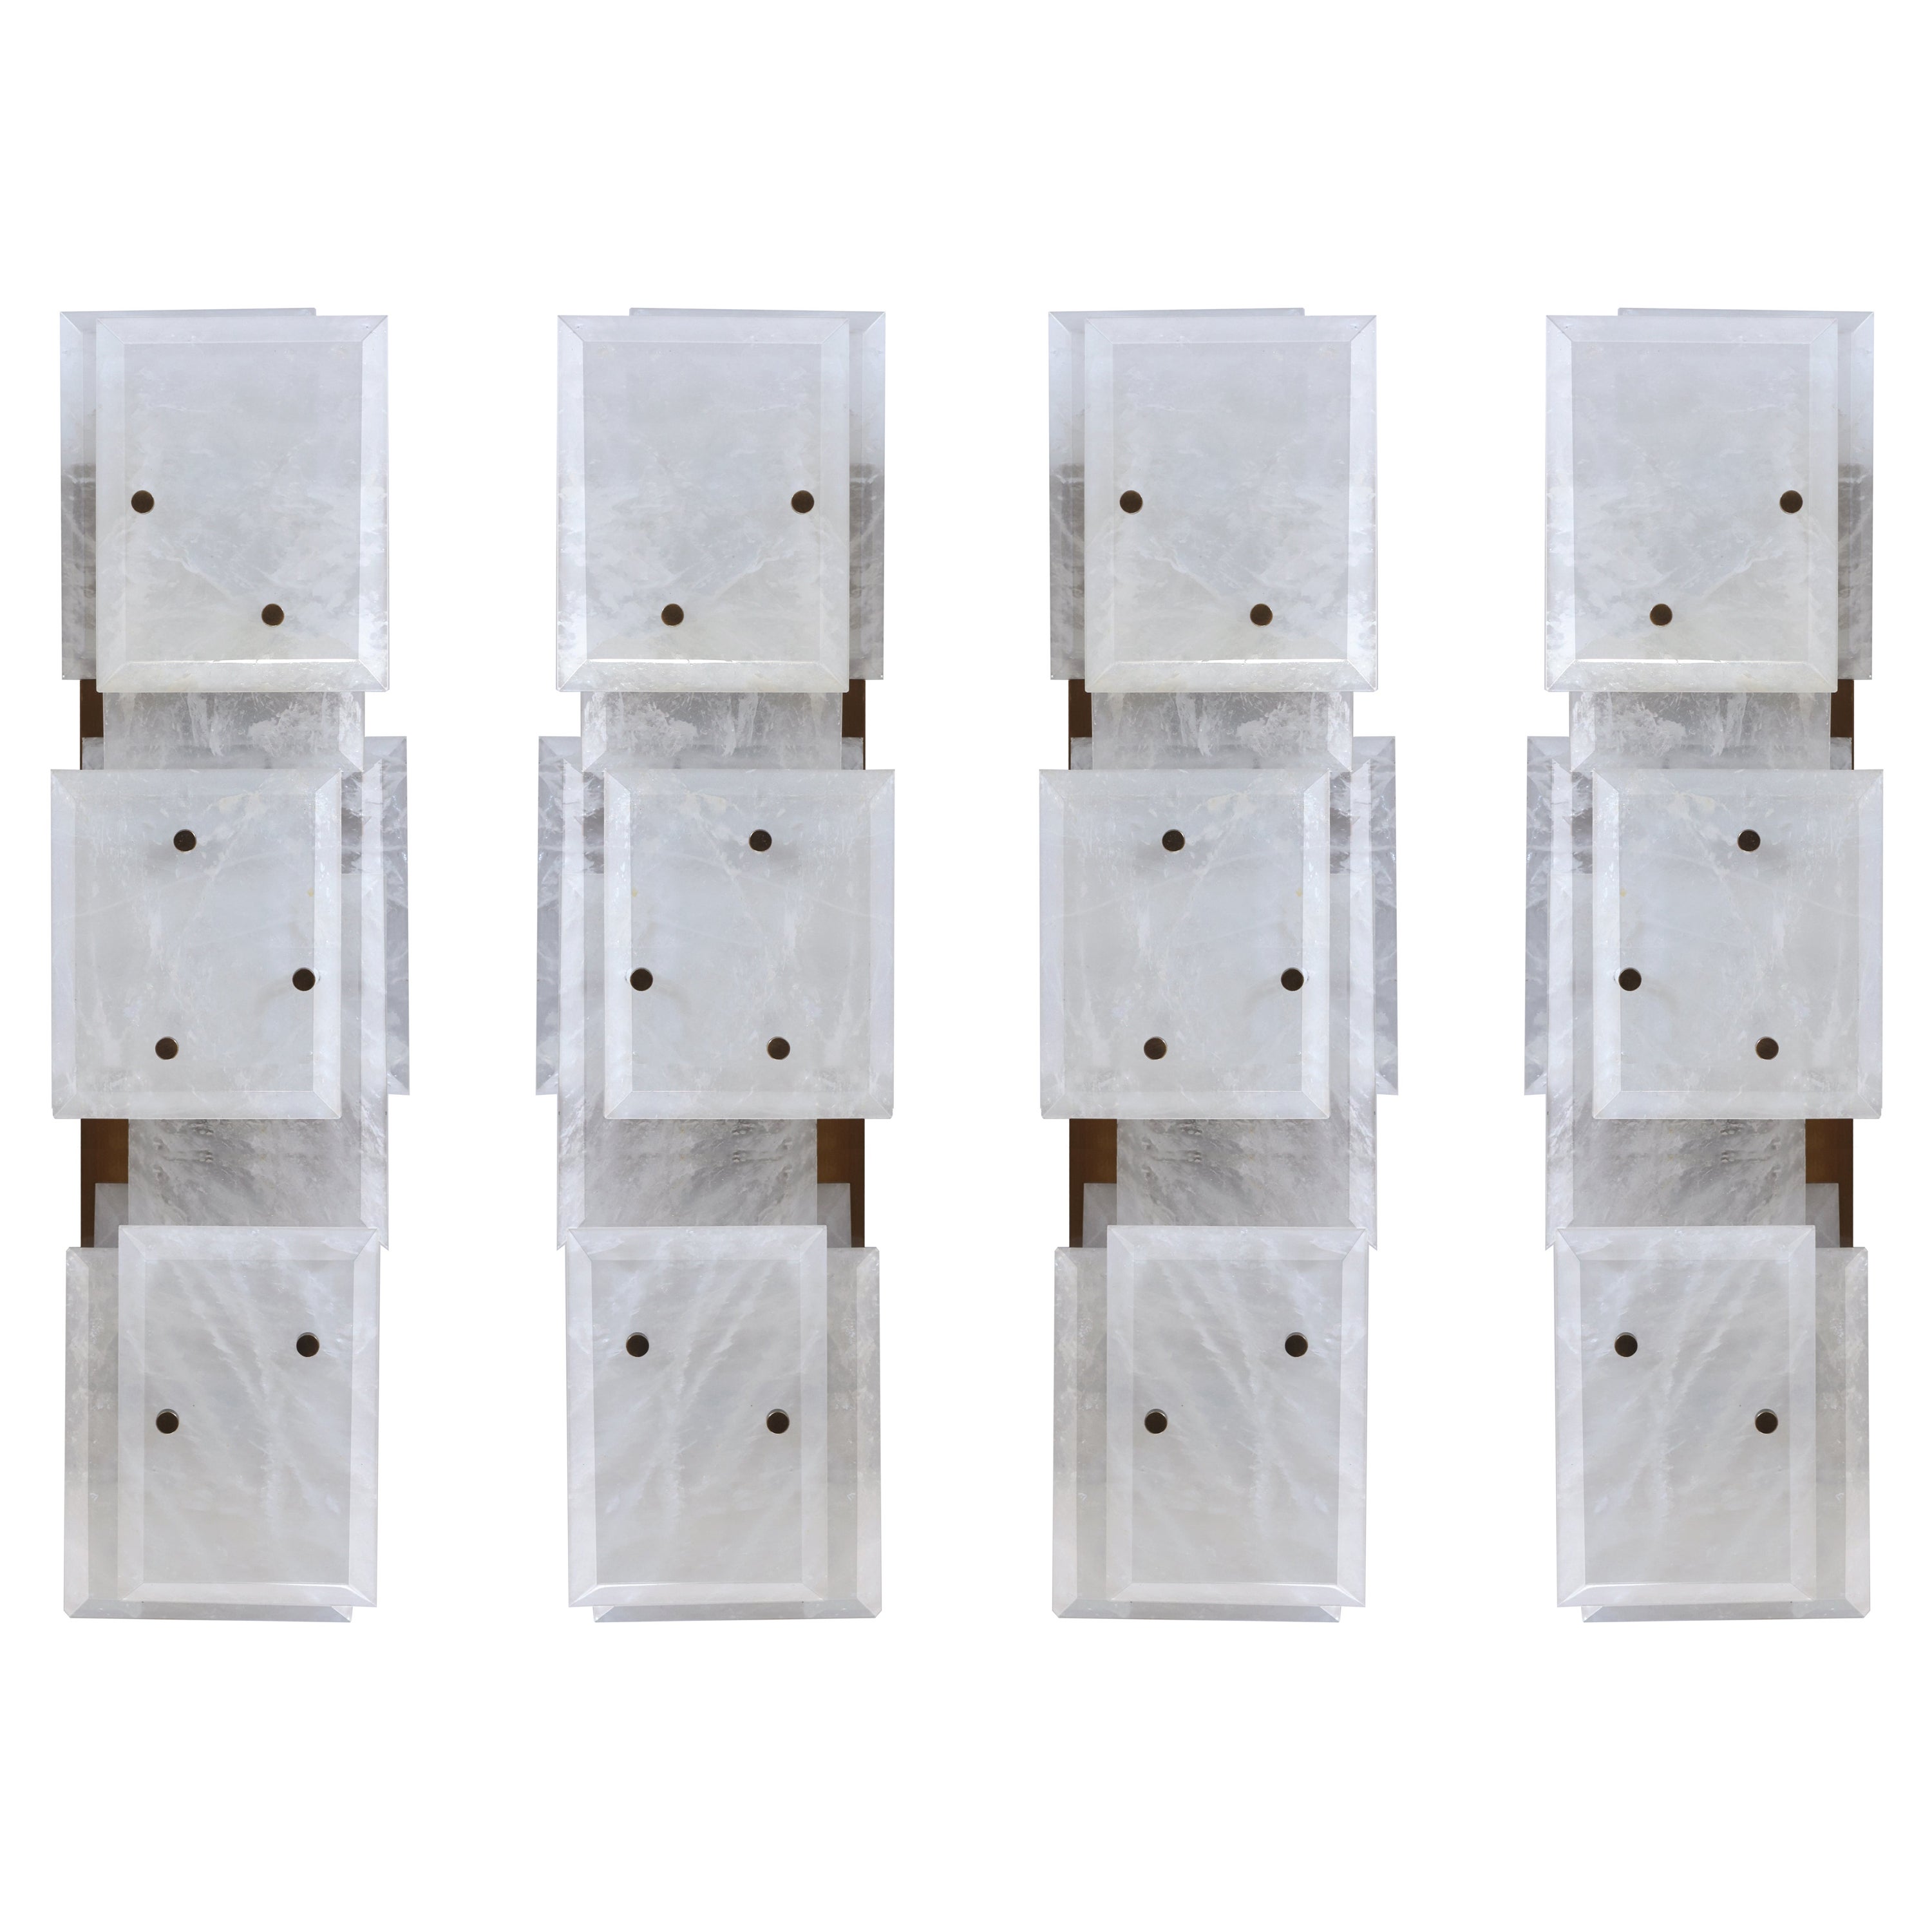 Group of Four CPS 18 II Sconces by Phoenix For Sale